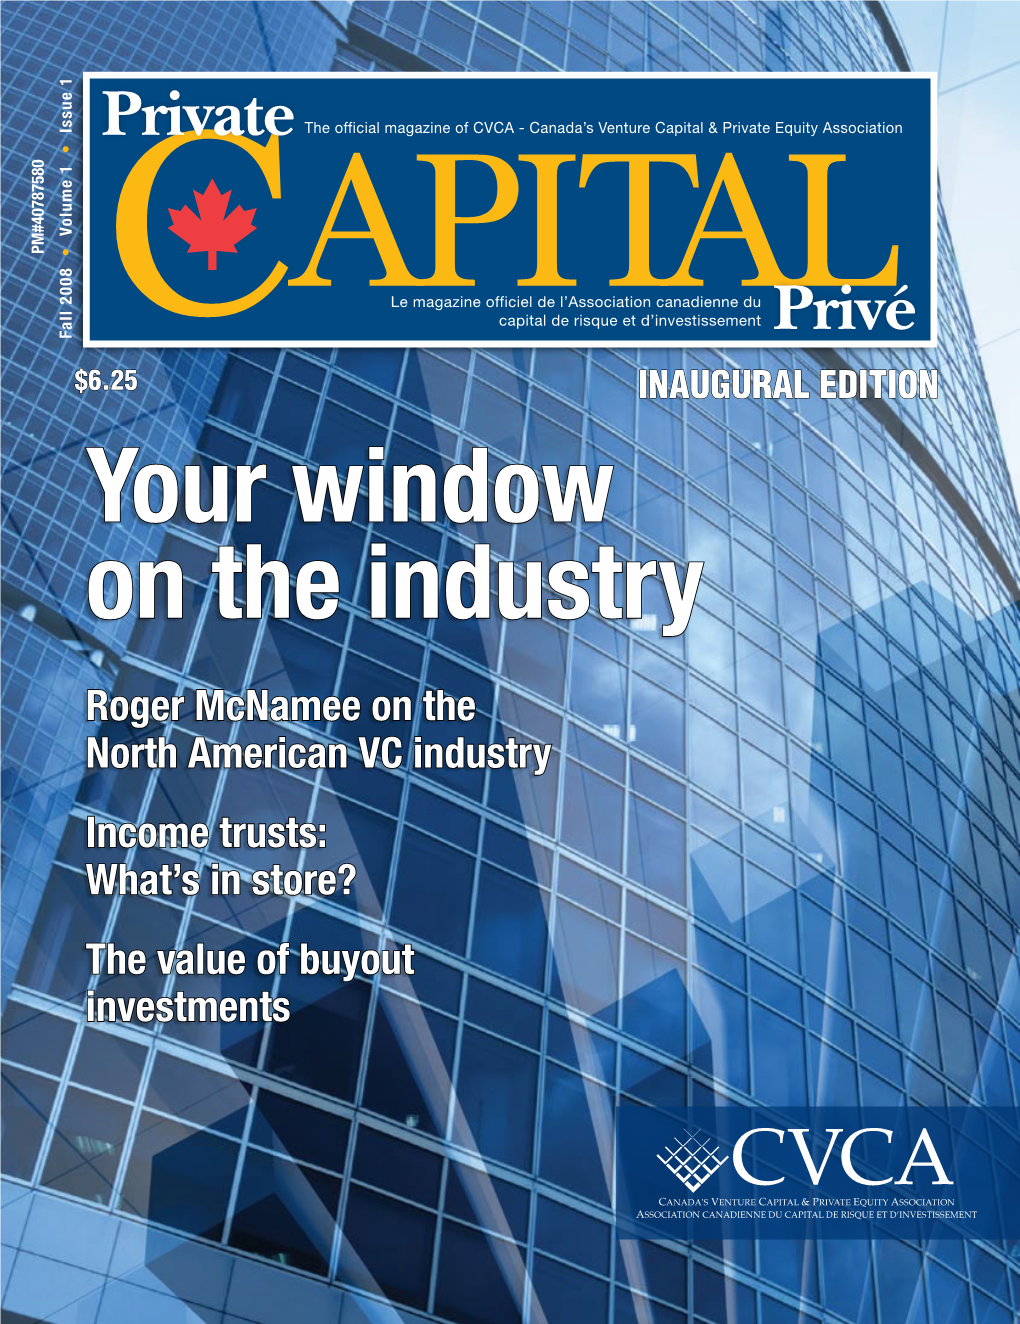 Private Equity Association Equity Private & Capital Venture Canada’S - CVCA of Magazine Official The